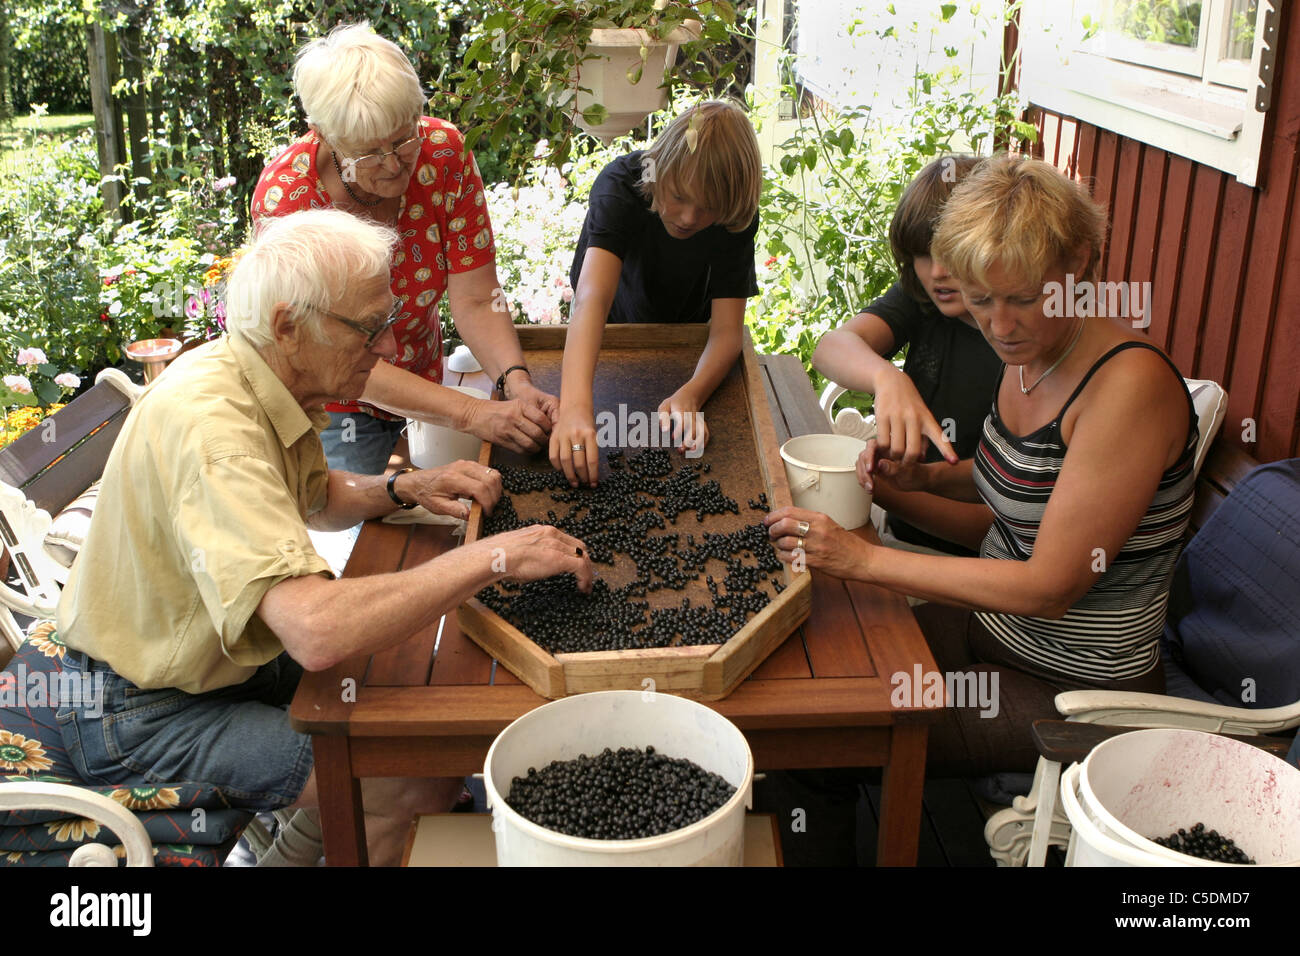 Group of family member cleaning blueberries at the porch Stock Photo